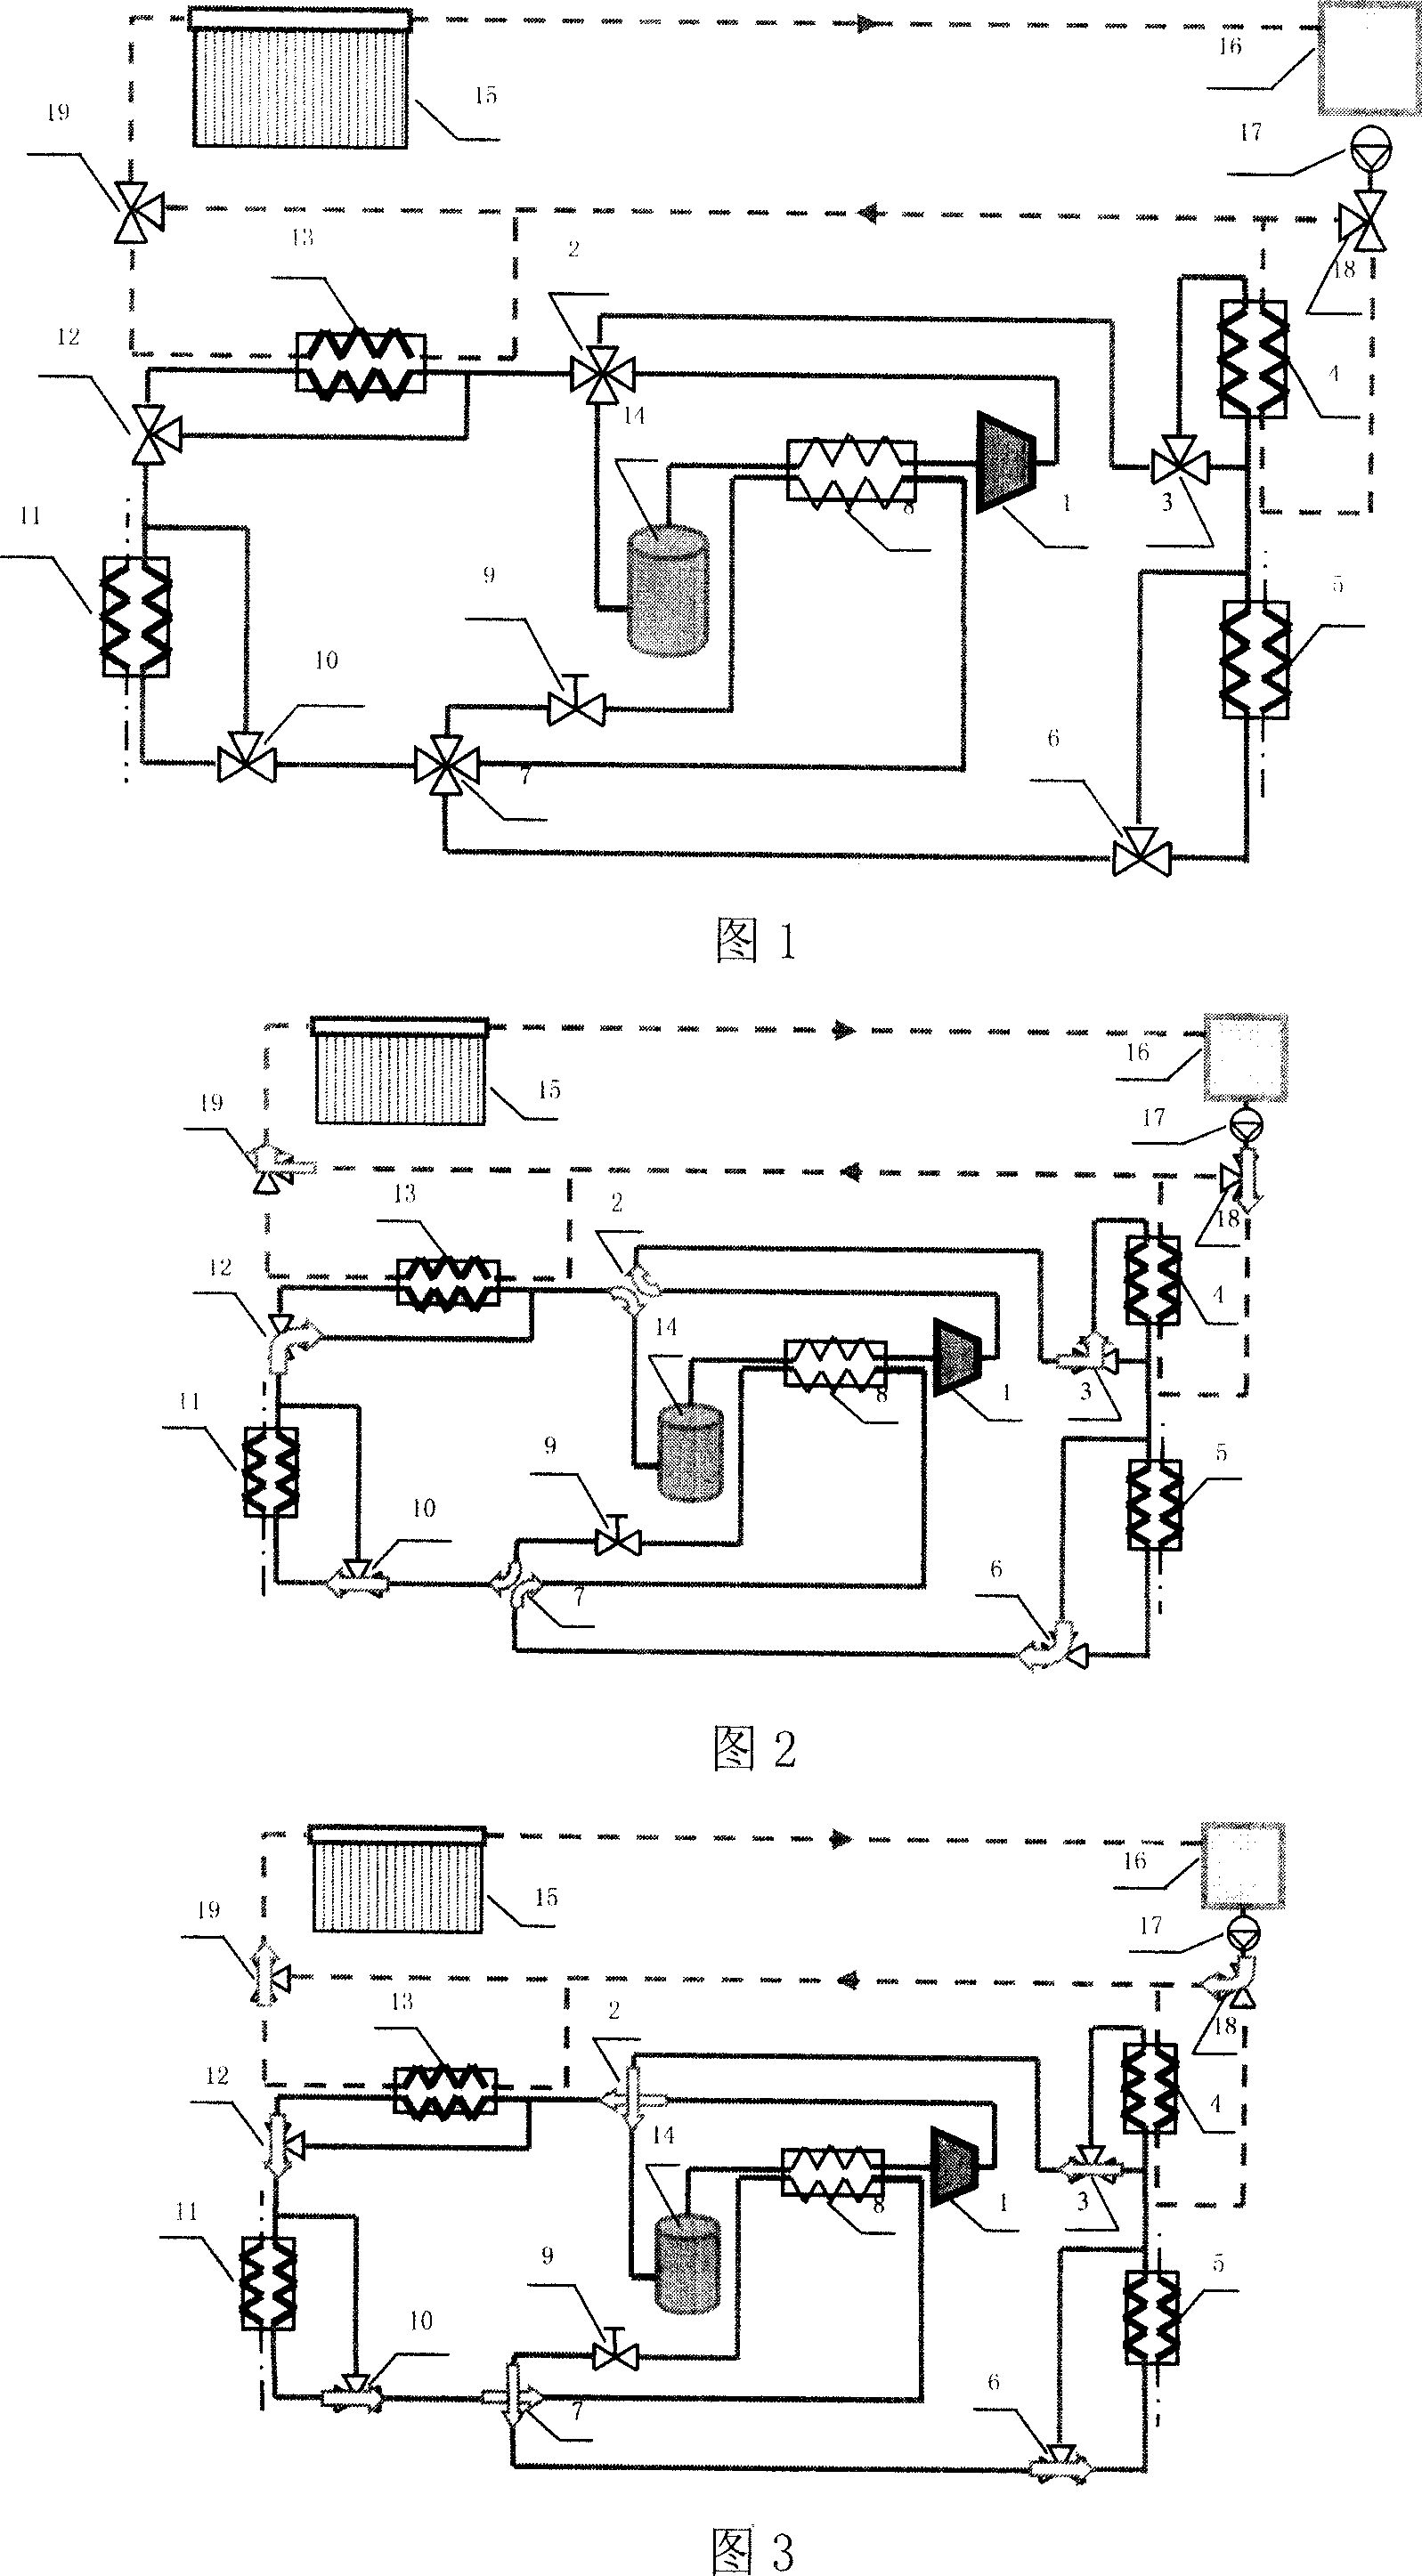 Integral air-conditioning system with solar assisted air source inter-critical carbon dioxide heat pump